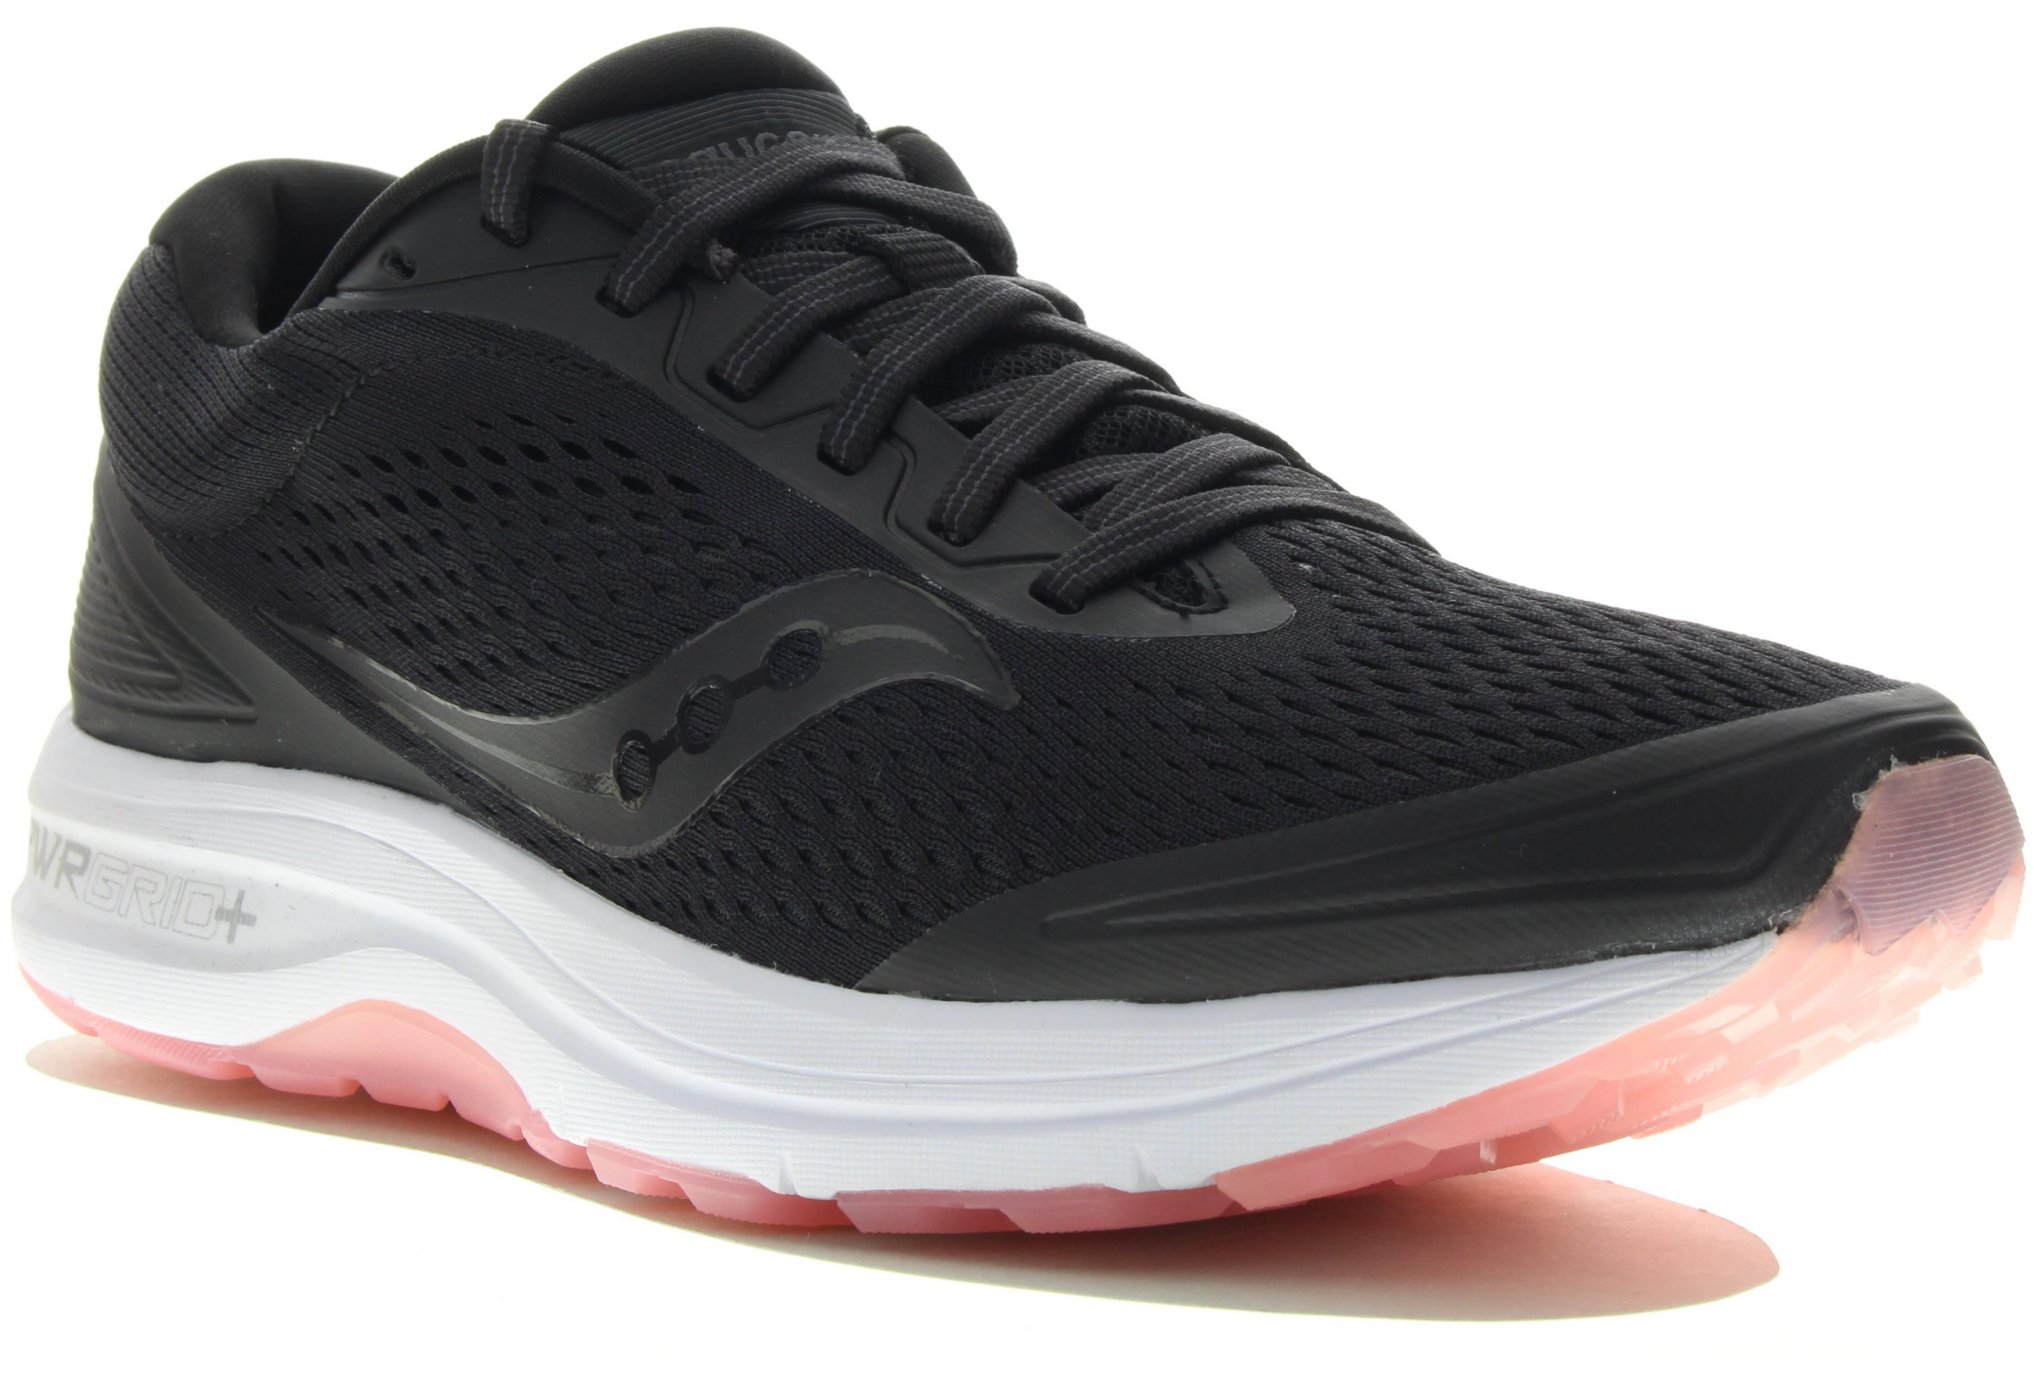 saucony fastwitch 5 mujer baratas